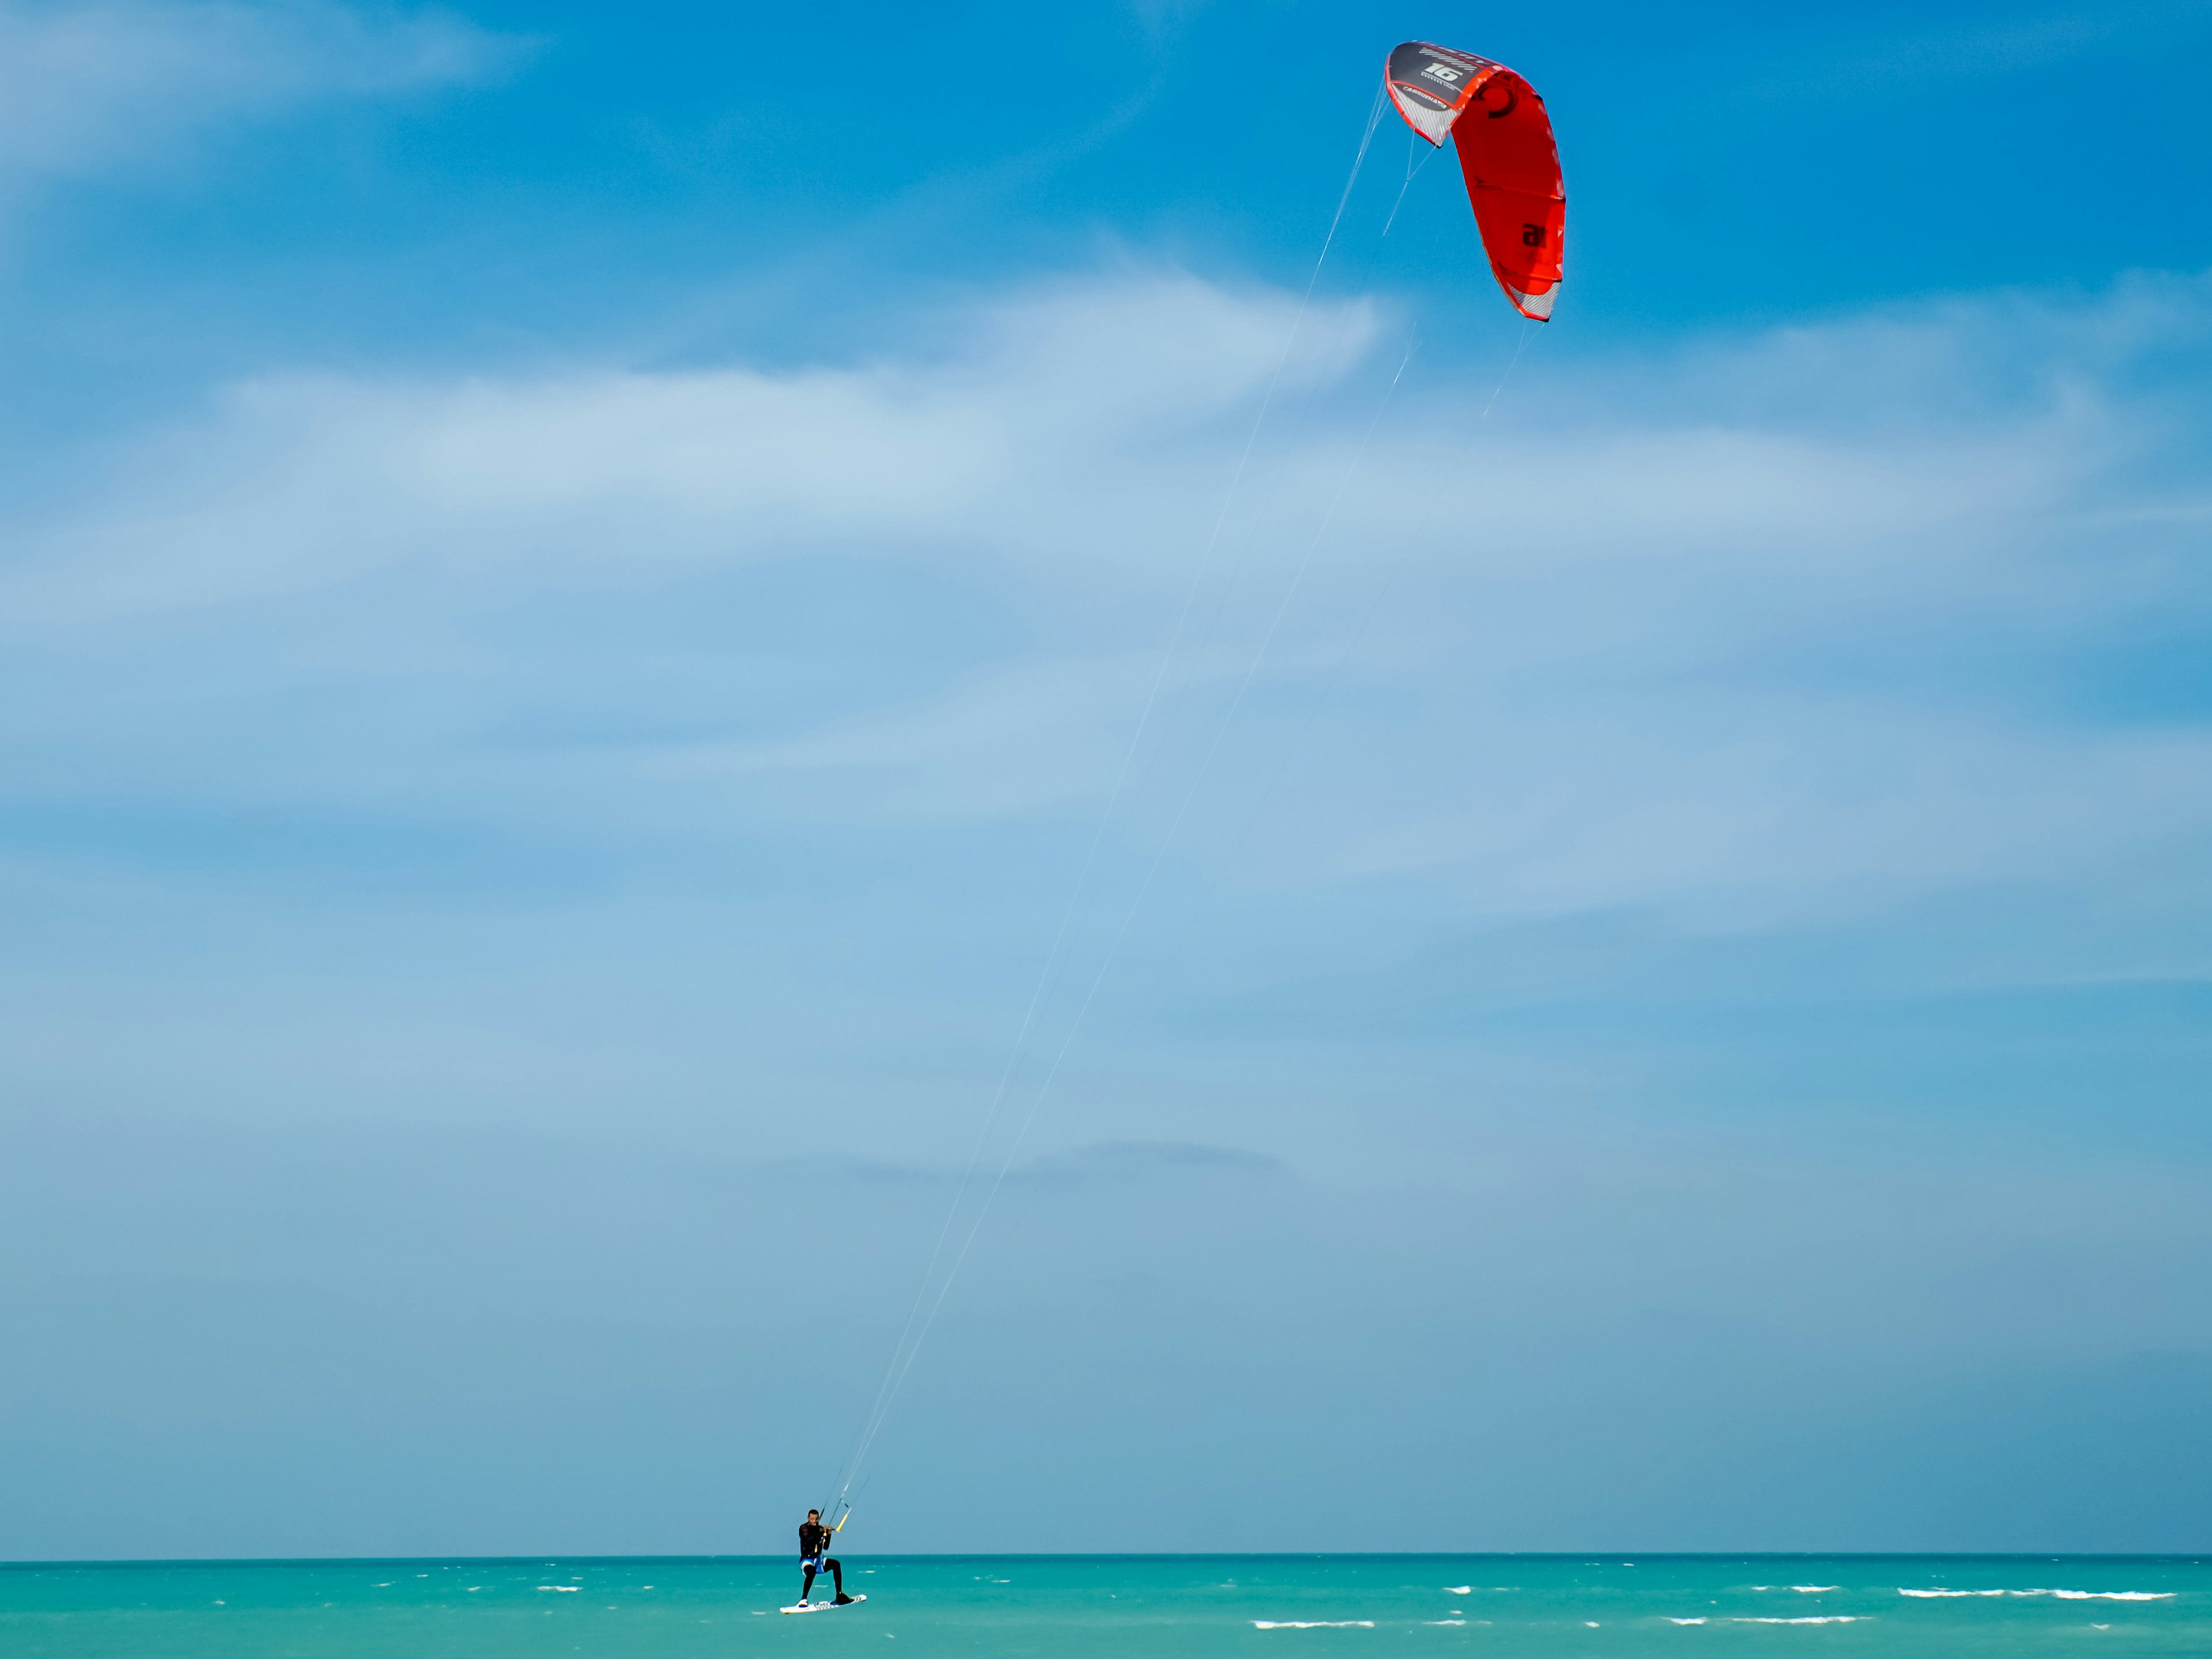 A kitesurfer under a red sail is carried along by the wind on the turquoise waters of Fuwairit Beach, Qatar 